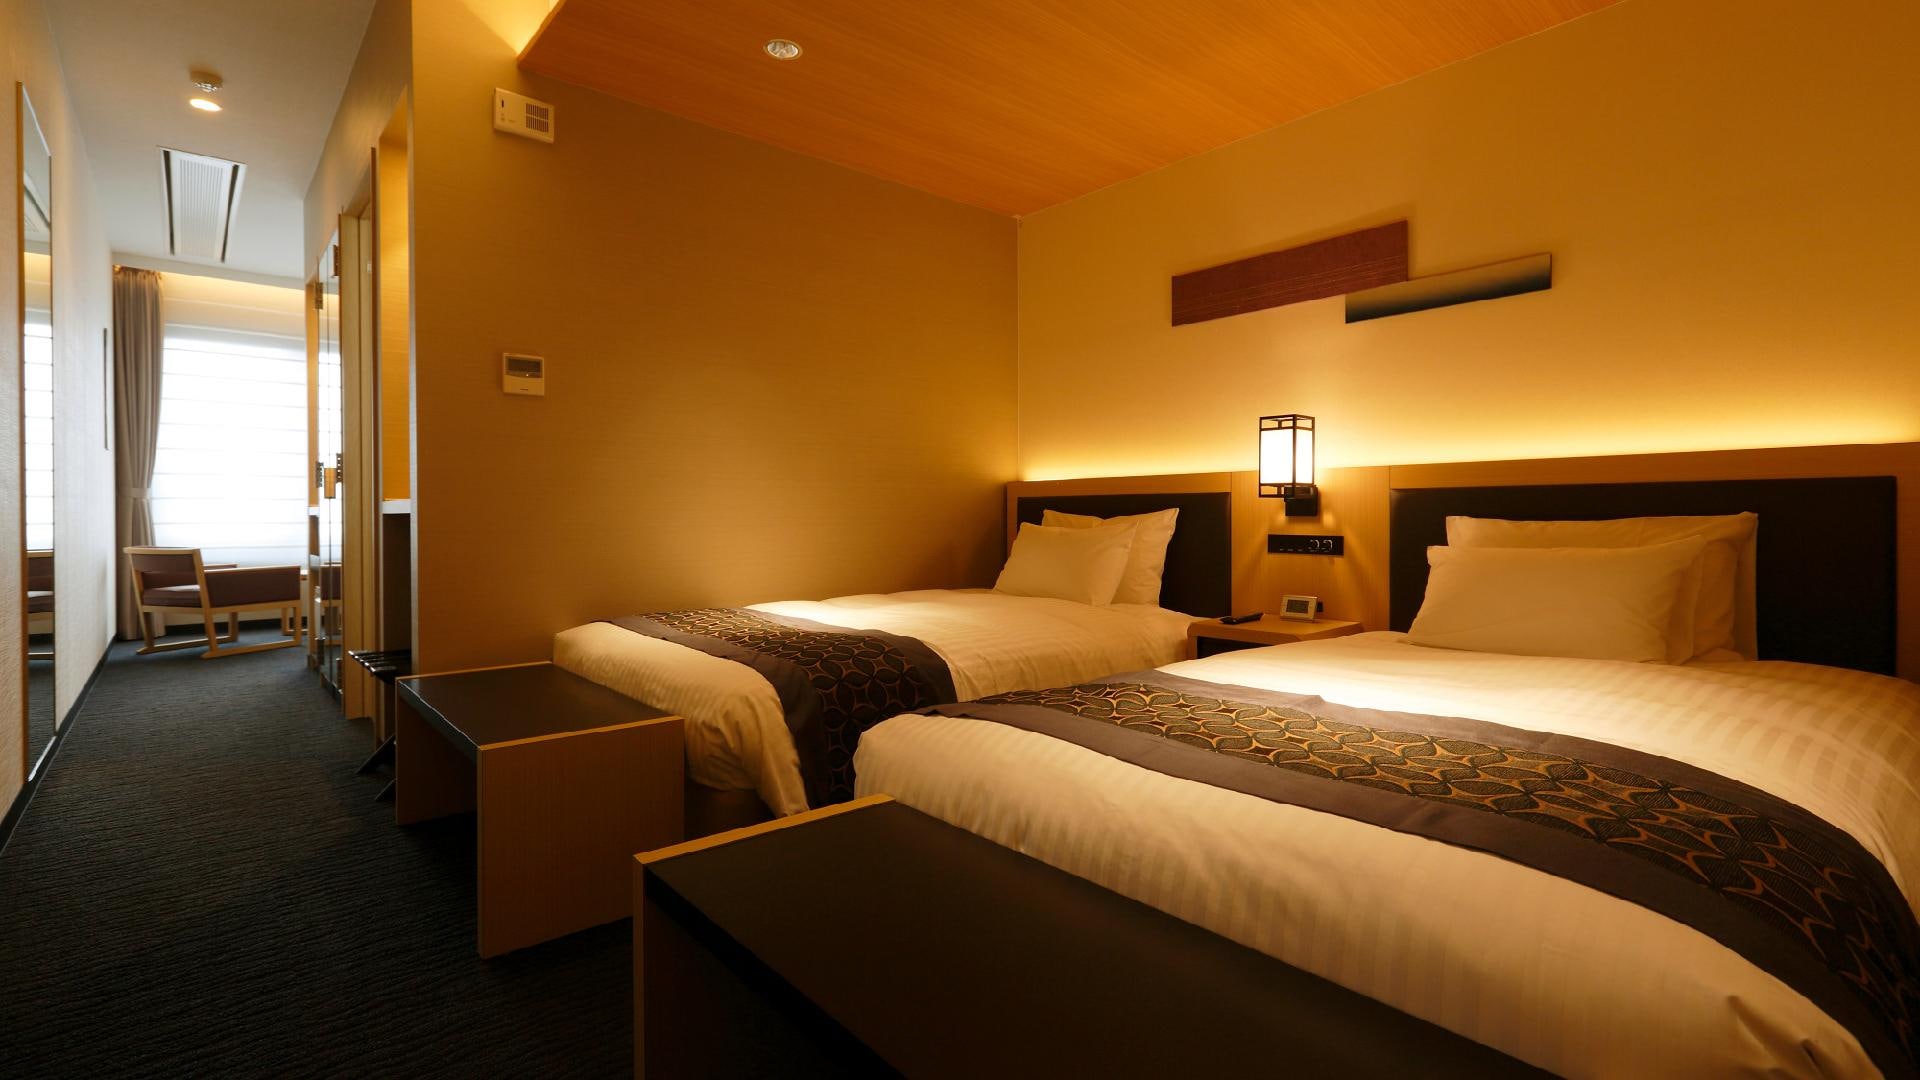 A Western-style room with a size of 32㎡ and a modern Japanese style. Separate standard with separate living room and bedroom.